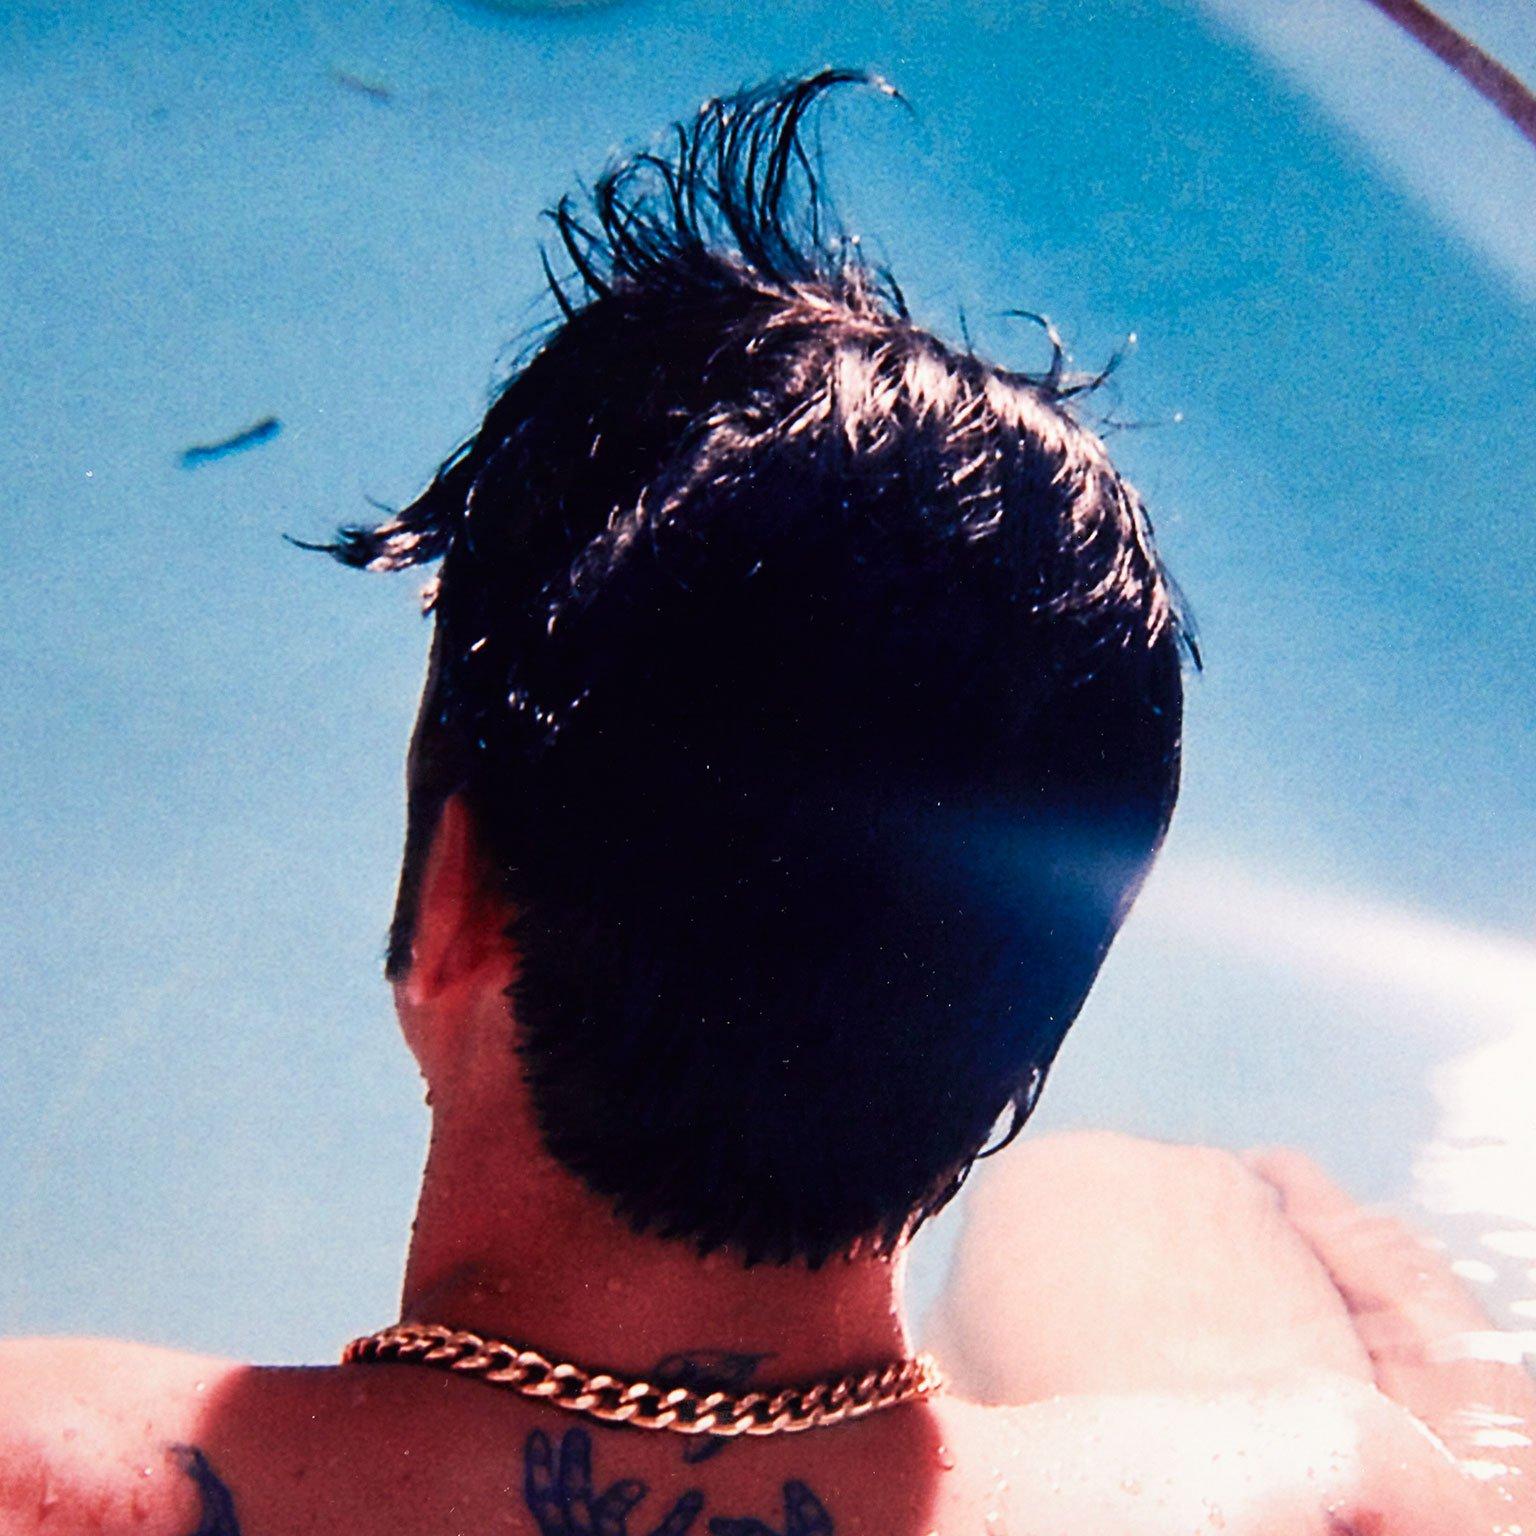 Poolside - Contemporary Photograph by Bruce LaBruce